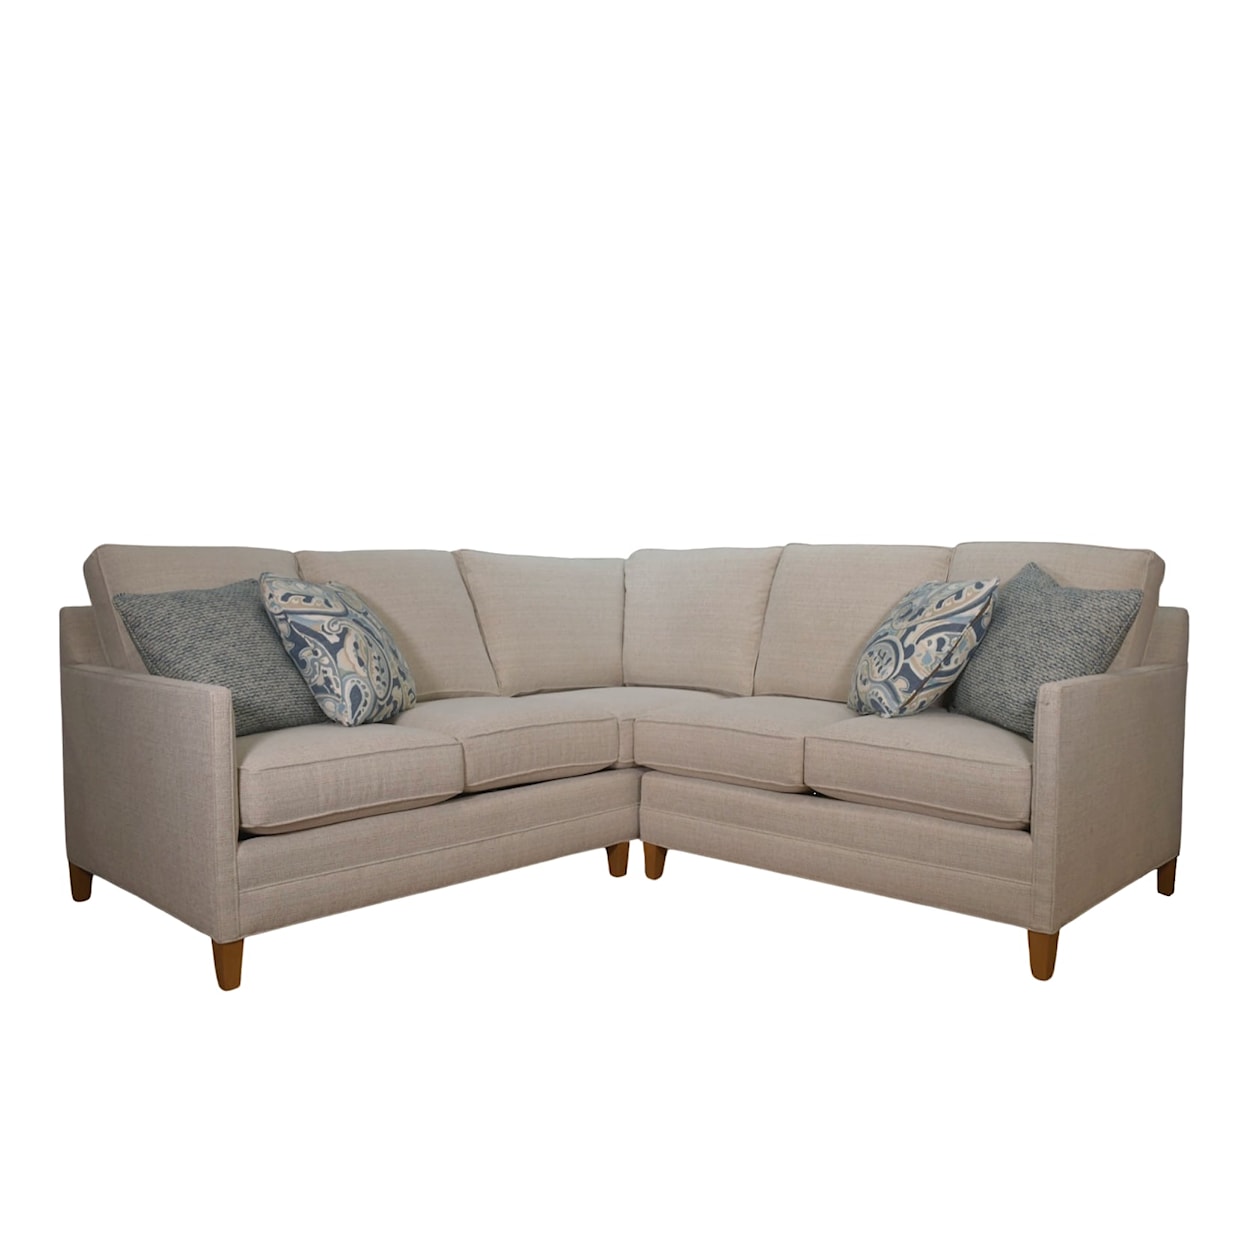 Temple Furniture Tailor Made 2 PIECE SECTIONAL